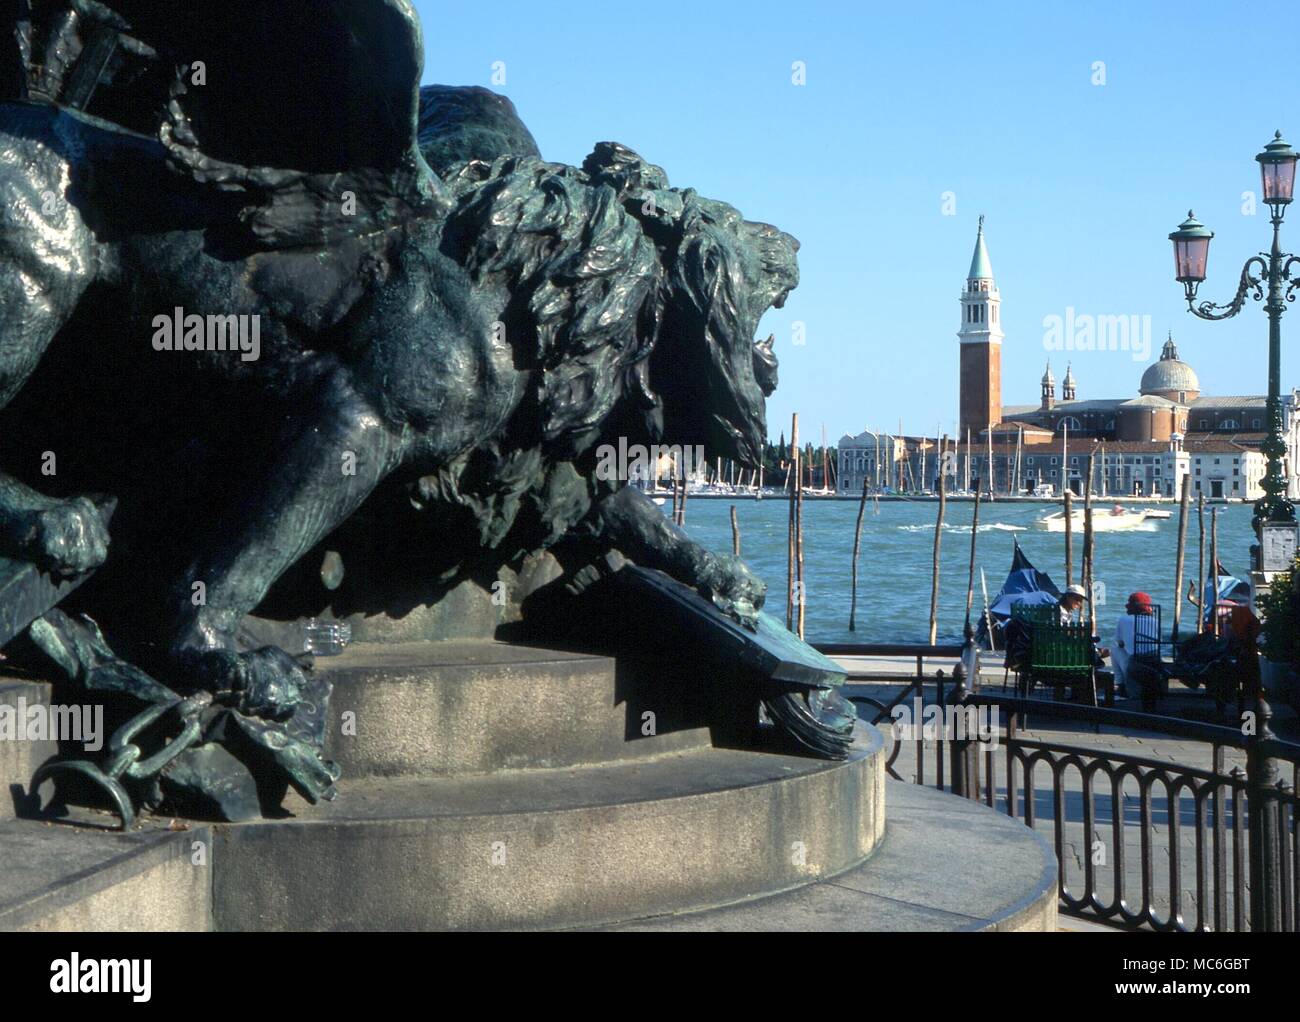 The Lion of St Mark - detail of statuary at Venice, Italy Stock Photo